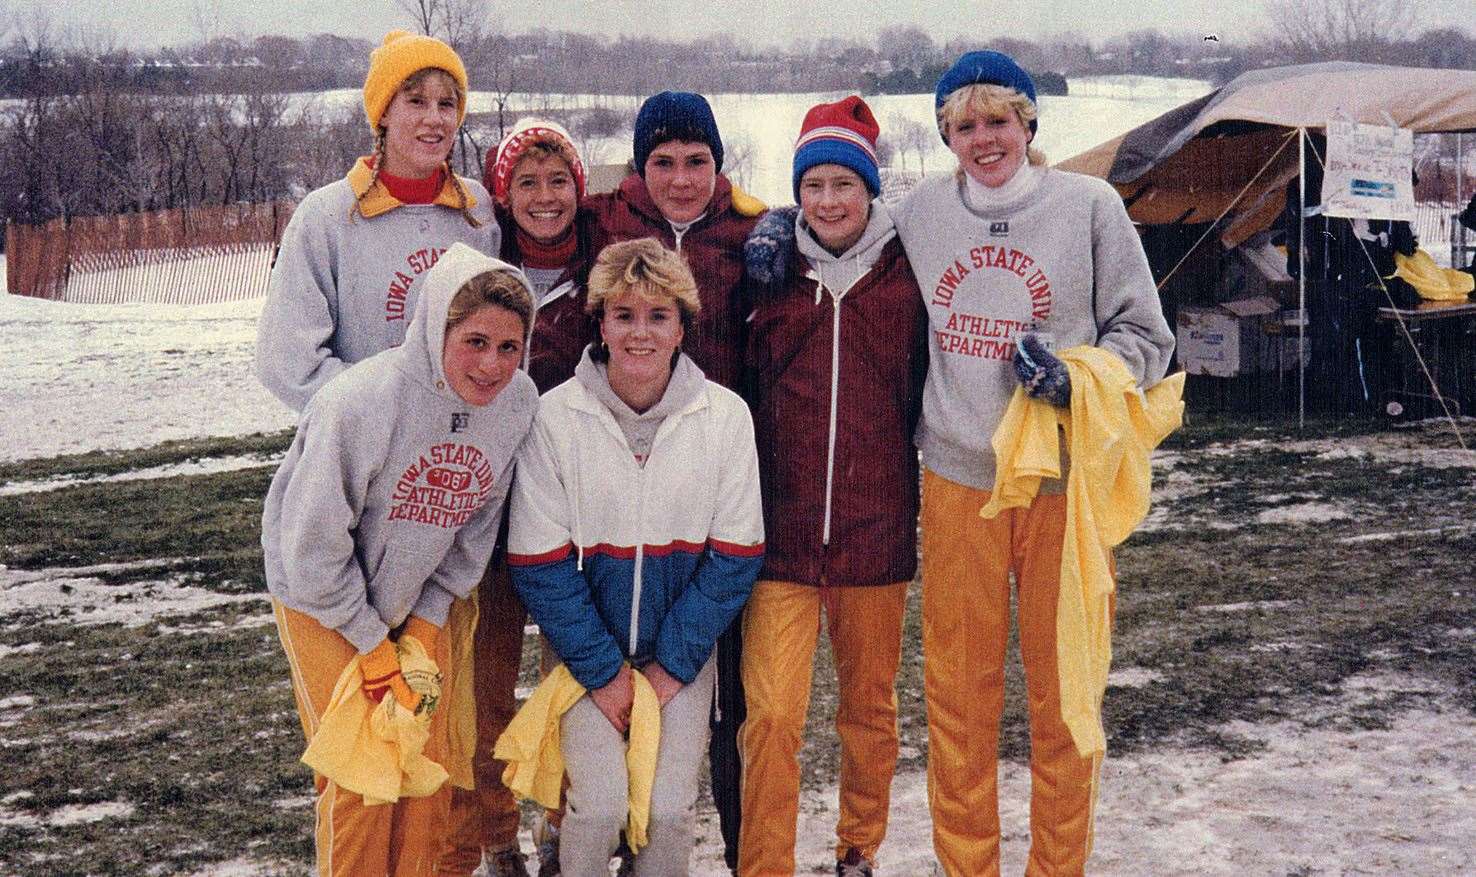 The Iowa State University cross-county team shortly after finishing second at the national championships in Milwaukee. Picture: Iowa State University